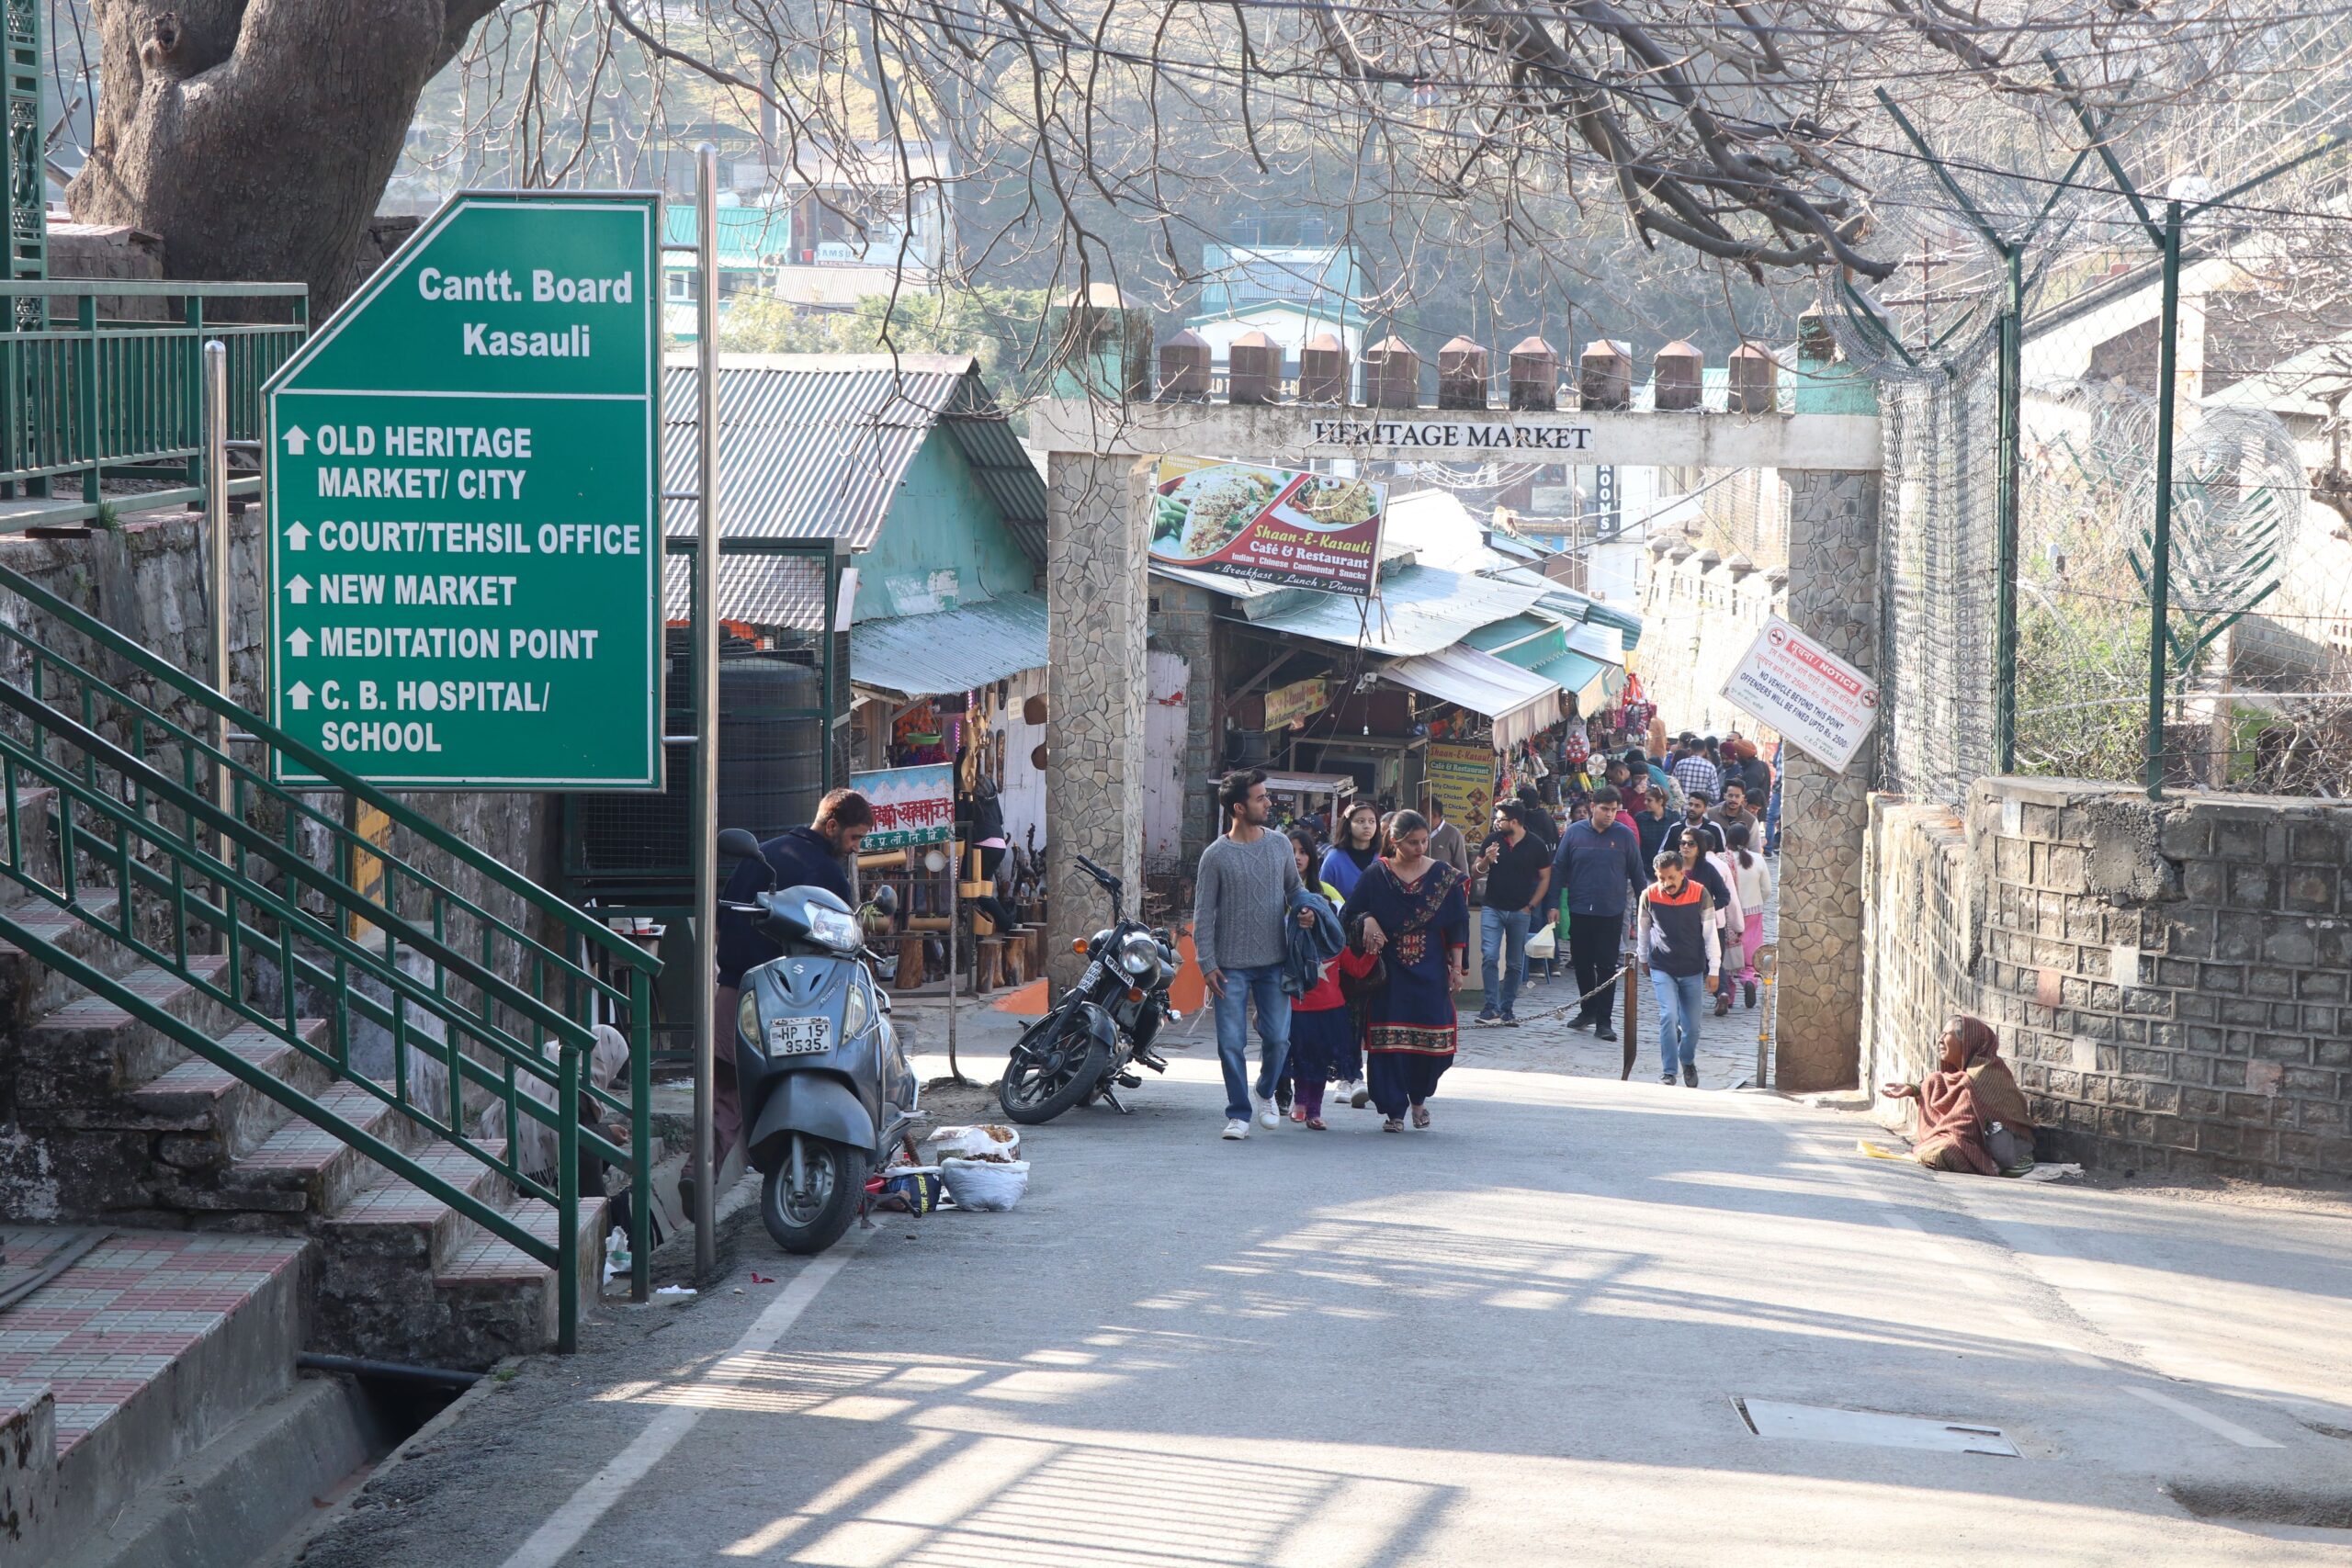 What to buy in kasauli